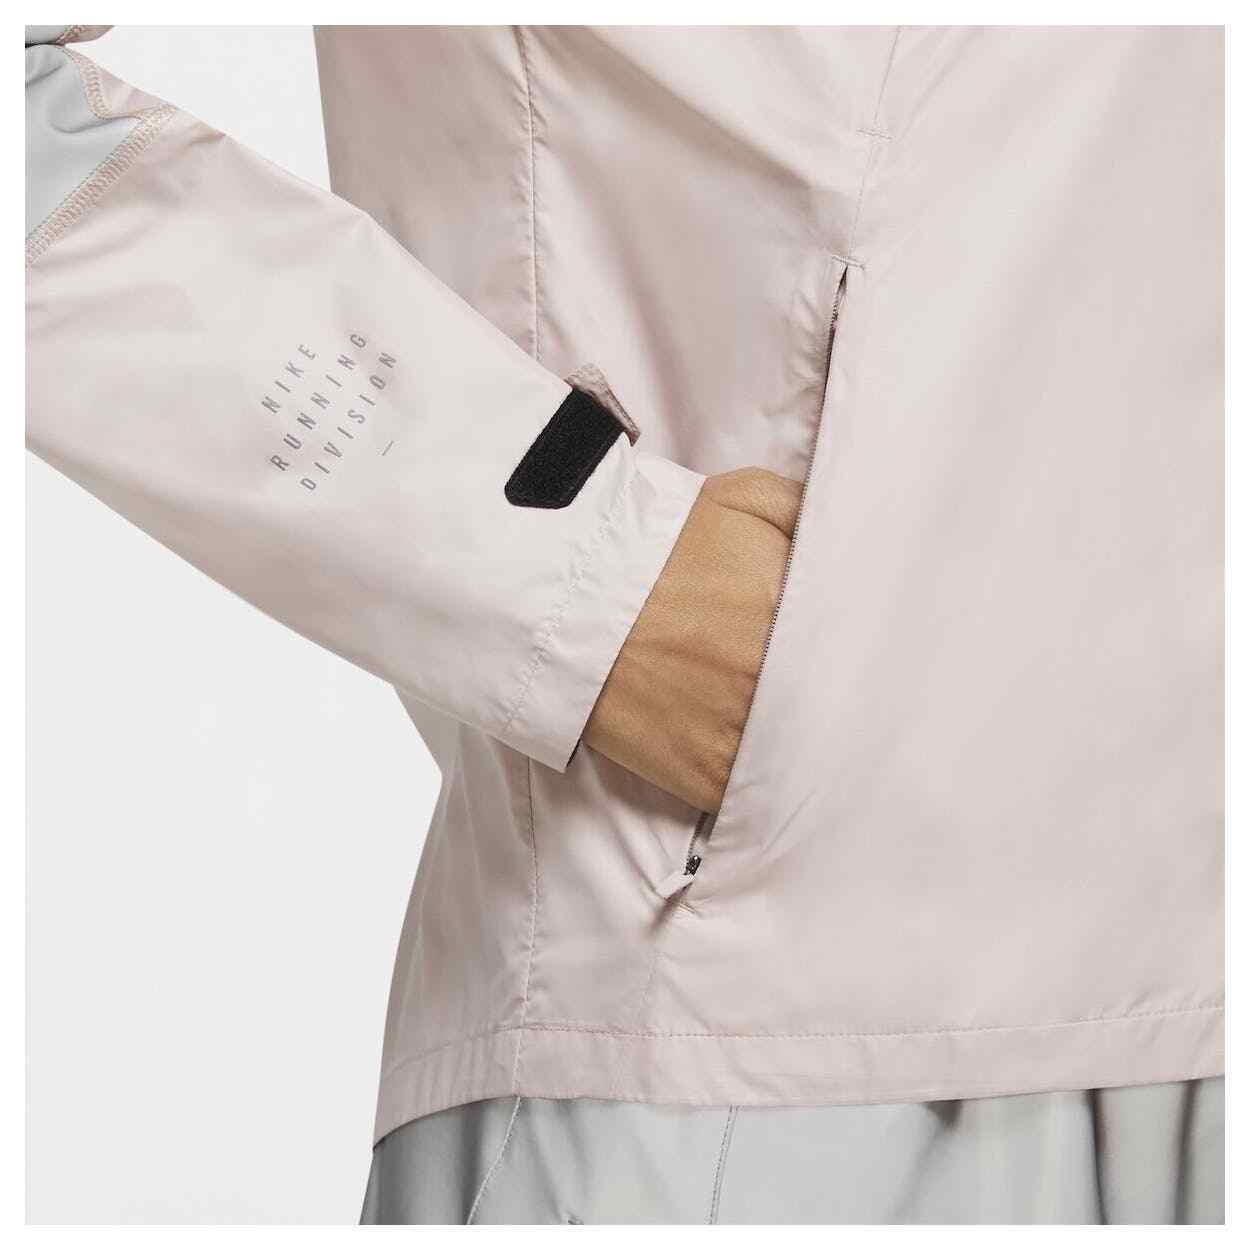 Nike clothing  - rose gold with reflective silver 2